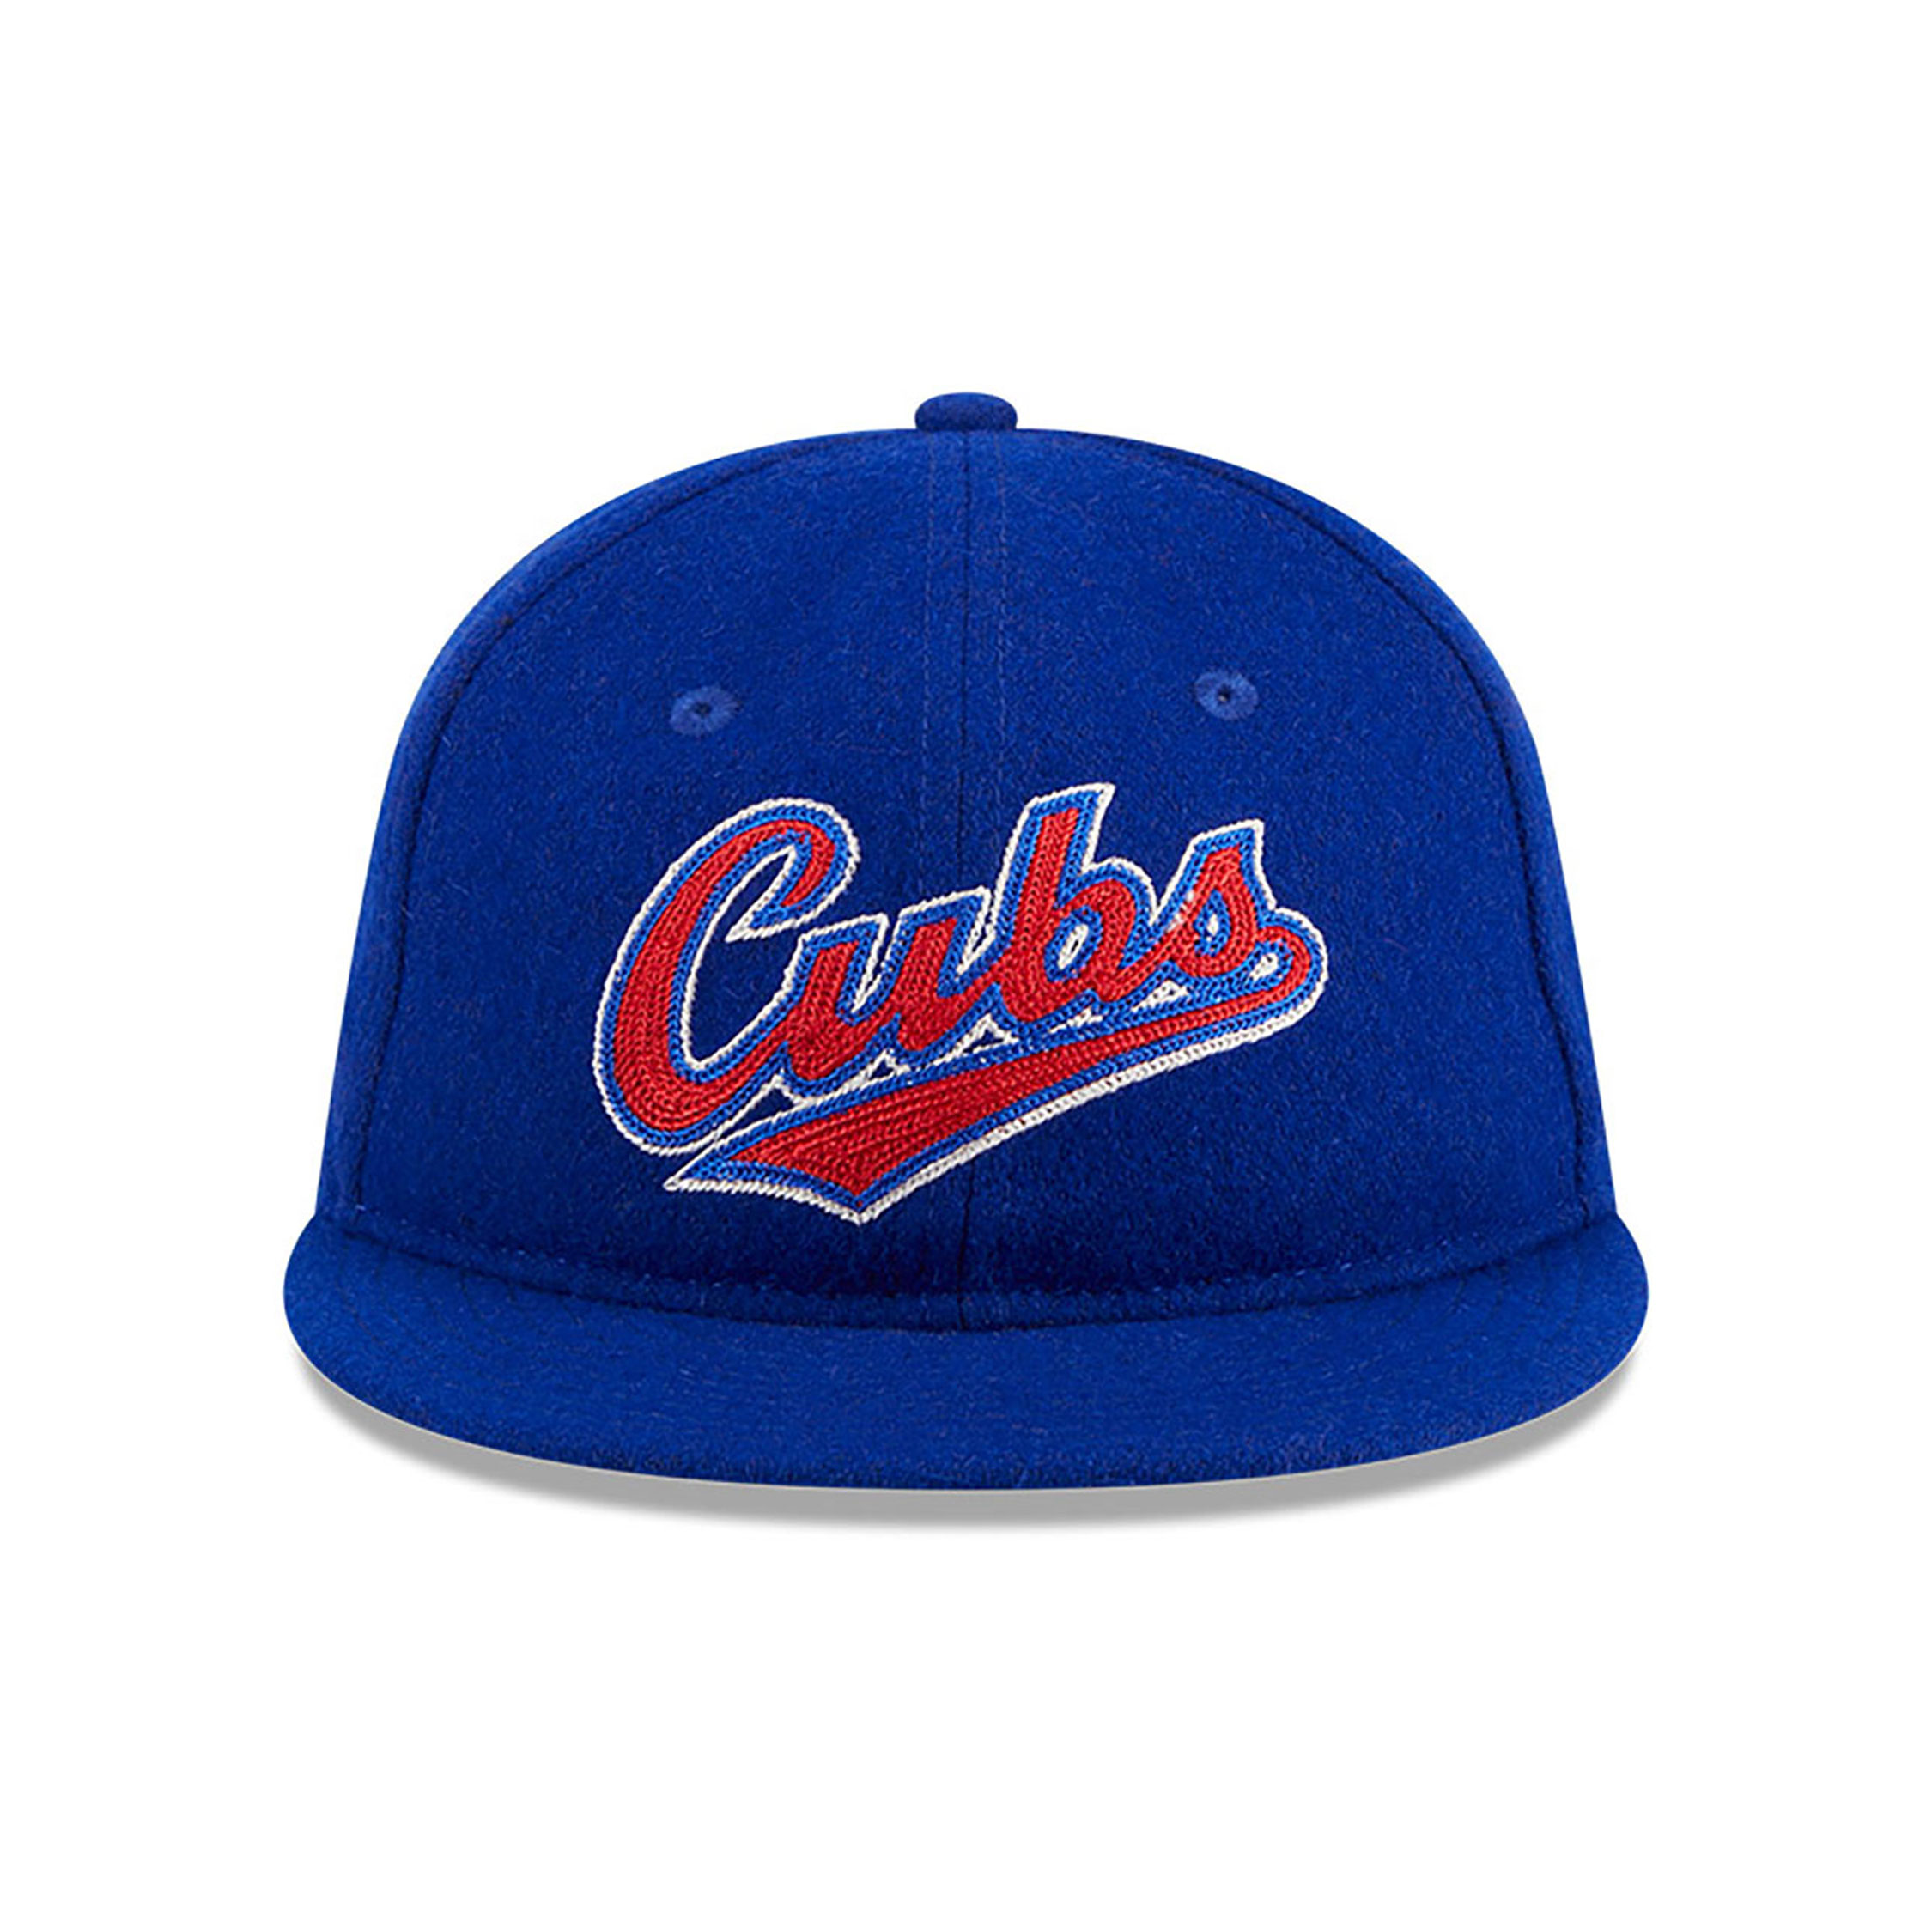 Chicago Cubs Melton Wool Blue Retro Crown 9FIFTY Strapback Cap